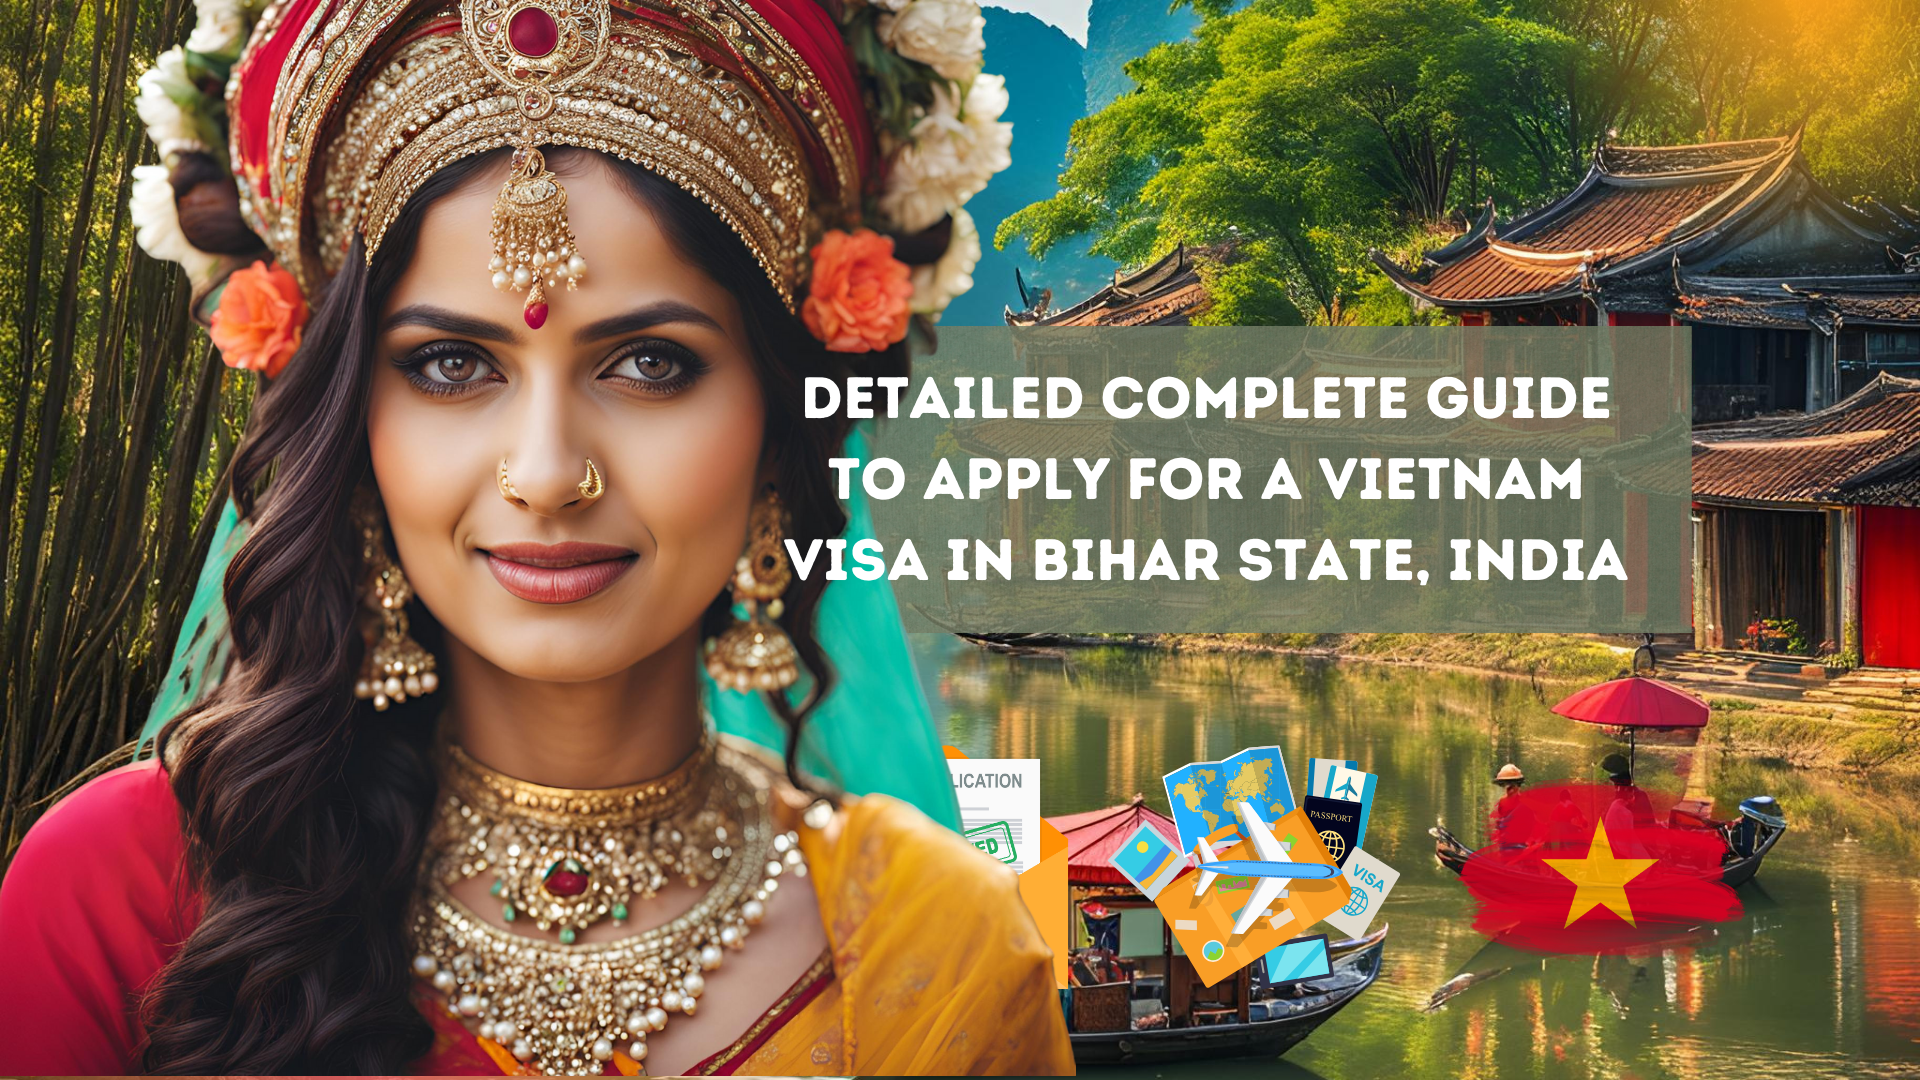 Detailed Complete Guide to Apply for a Vietnam Visa in Bihar State, India